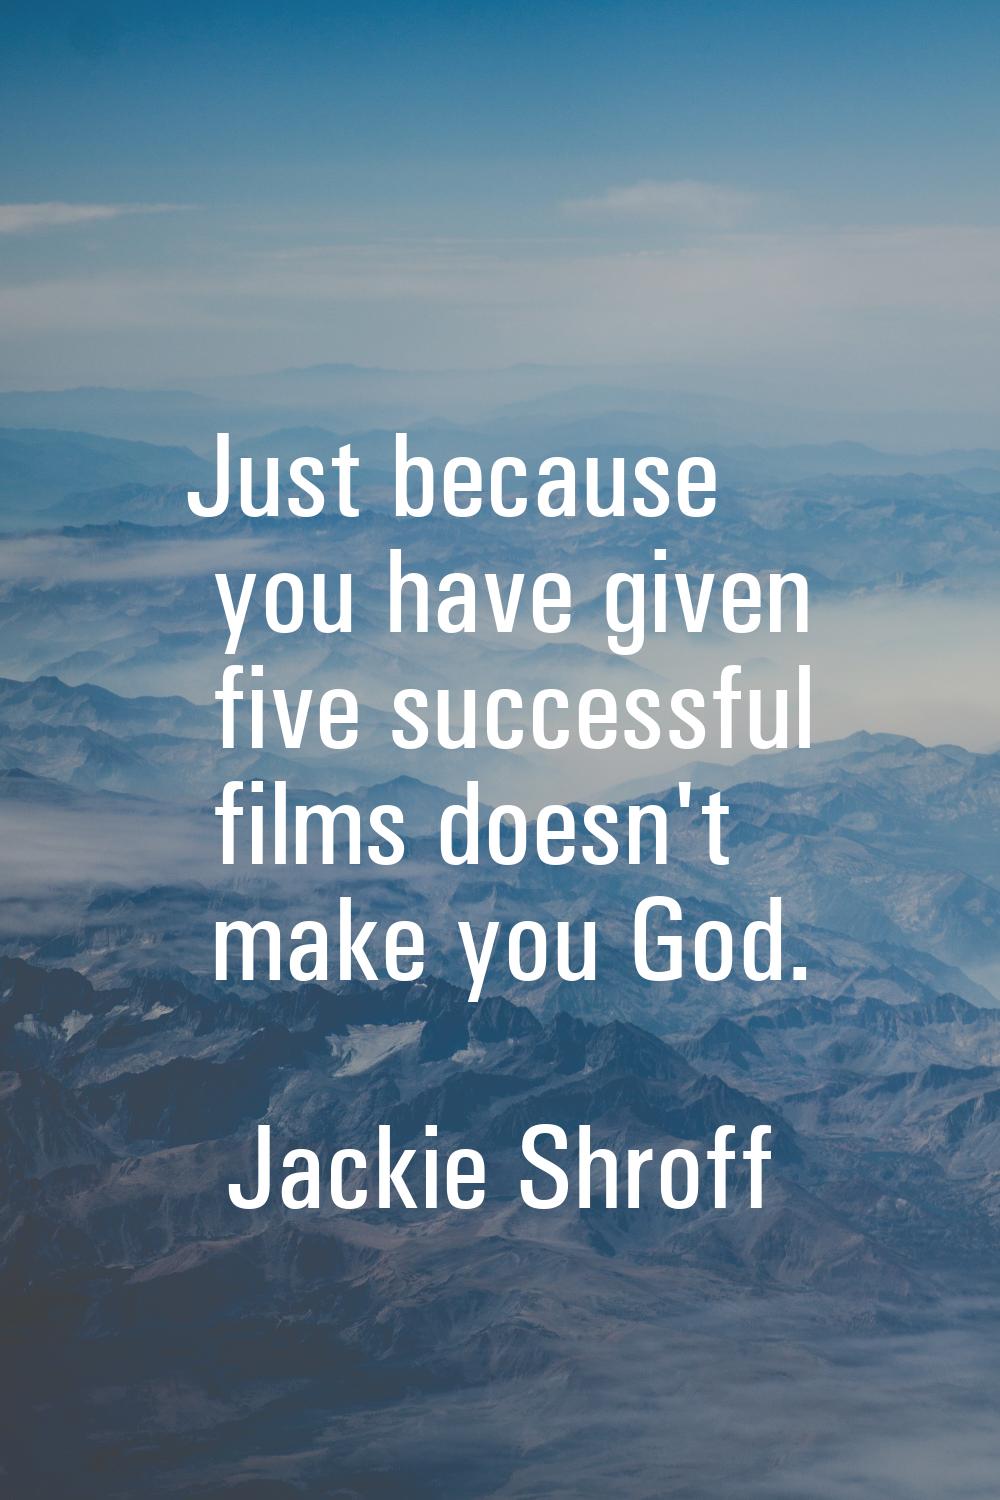 Just because you have given five successful films doesn't make you God.